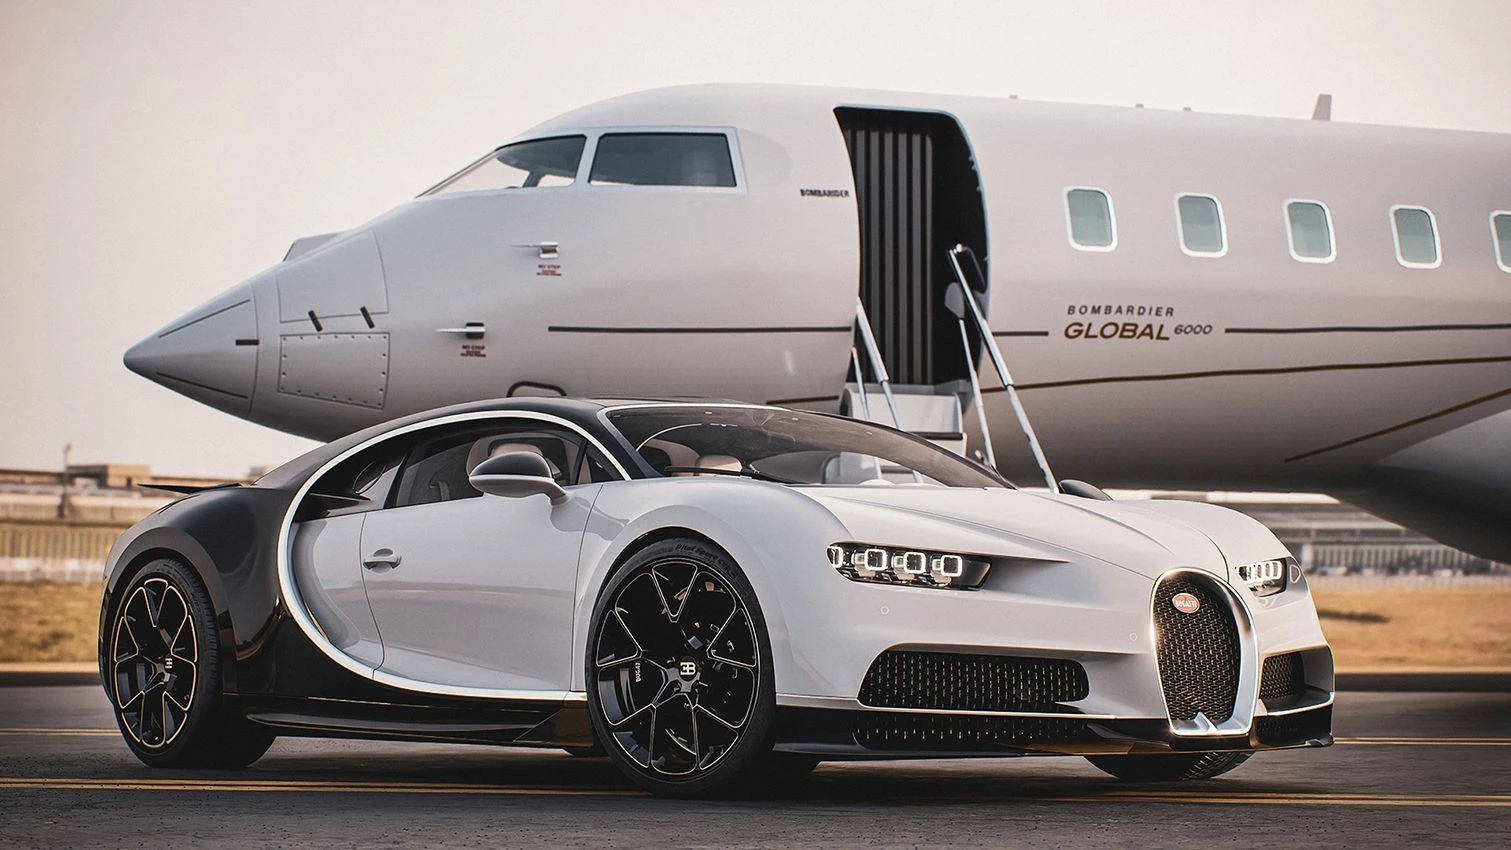 Bugatti Chiron by David Baylis by 3d rendering behind private jet